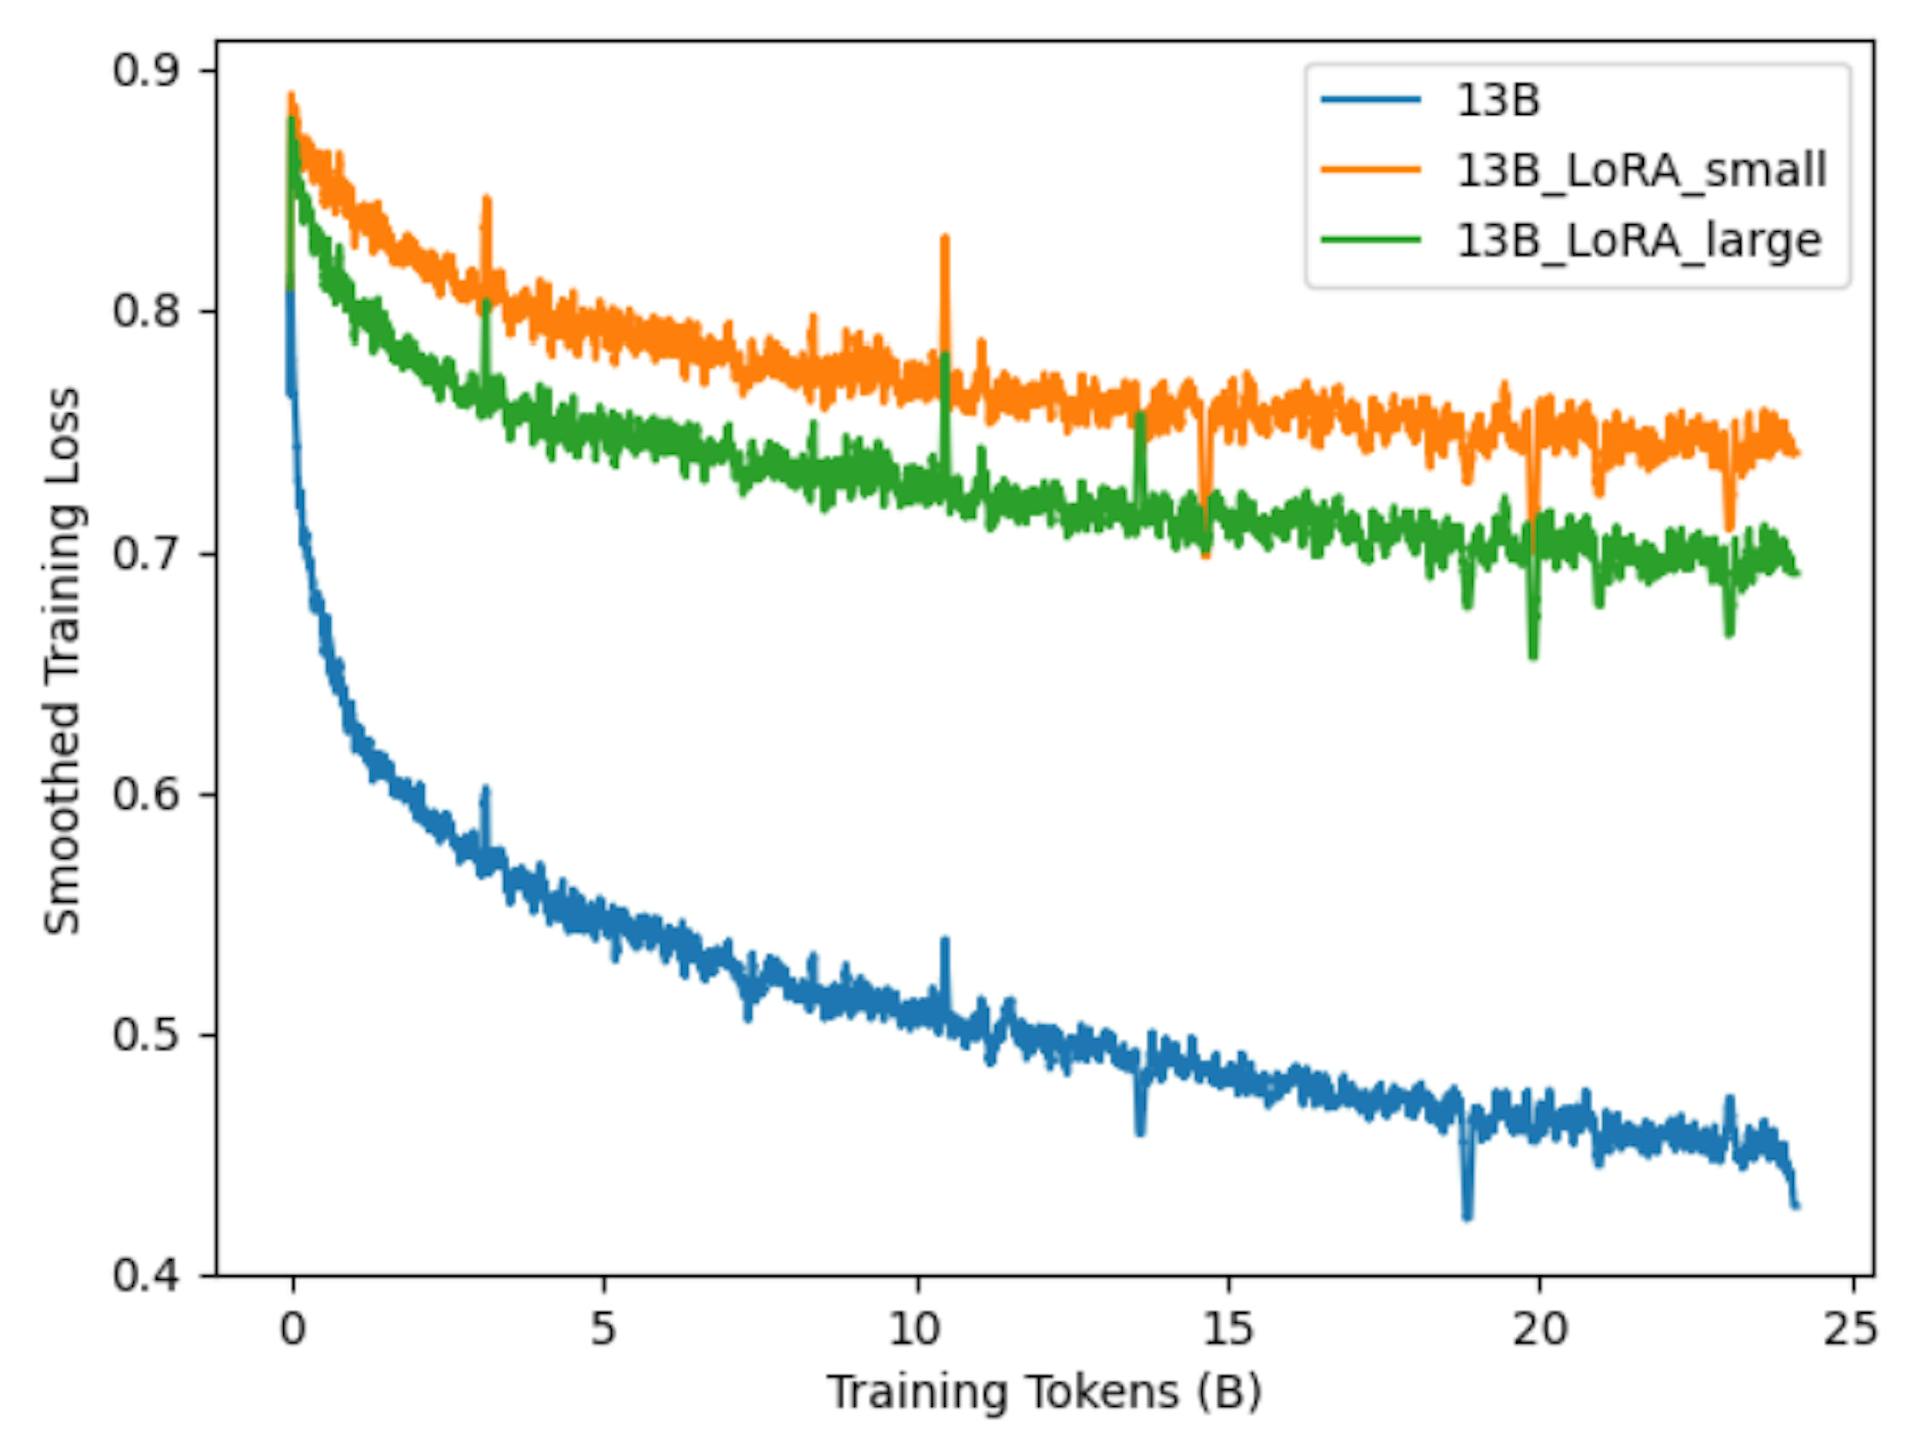 Fig. 13: Smoothed Training Loss of LoRA [16]. 13B corresponds to full parameter DAPT.